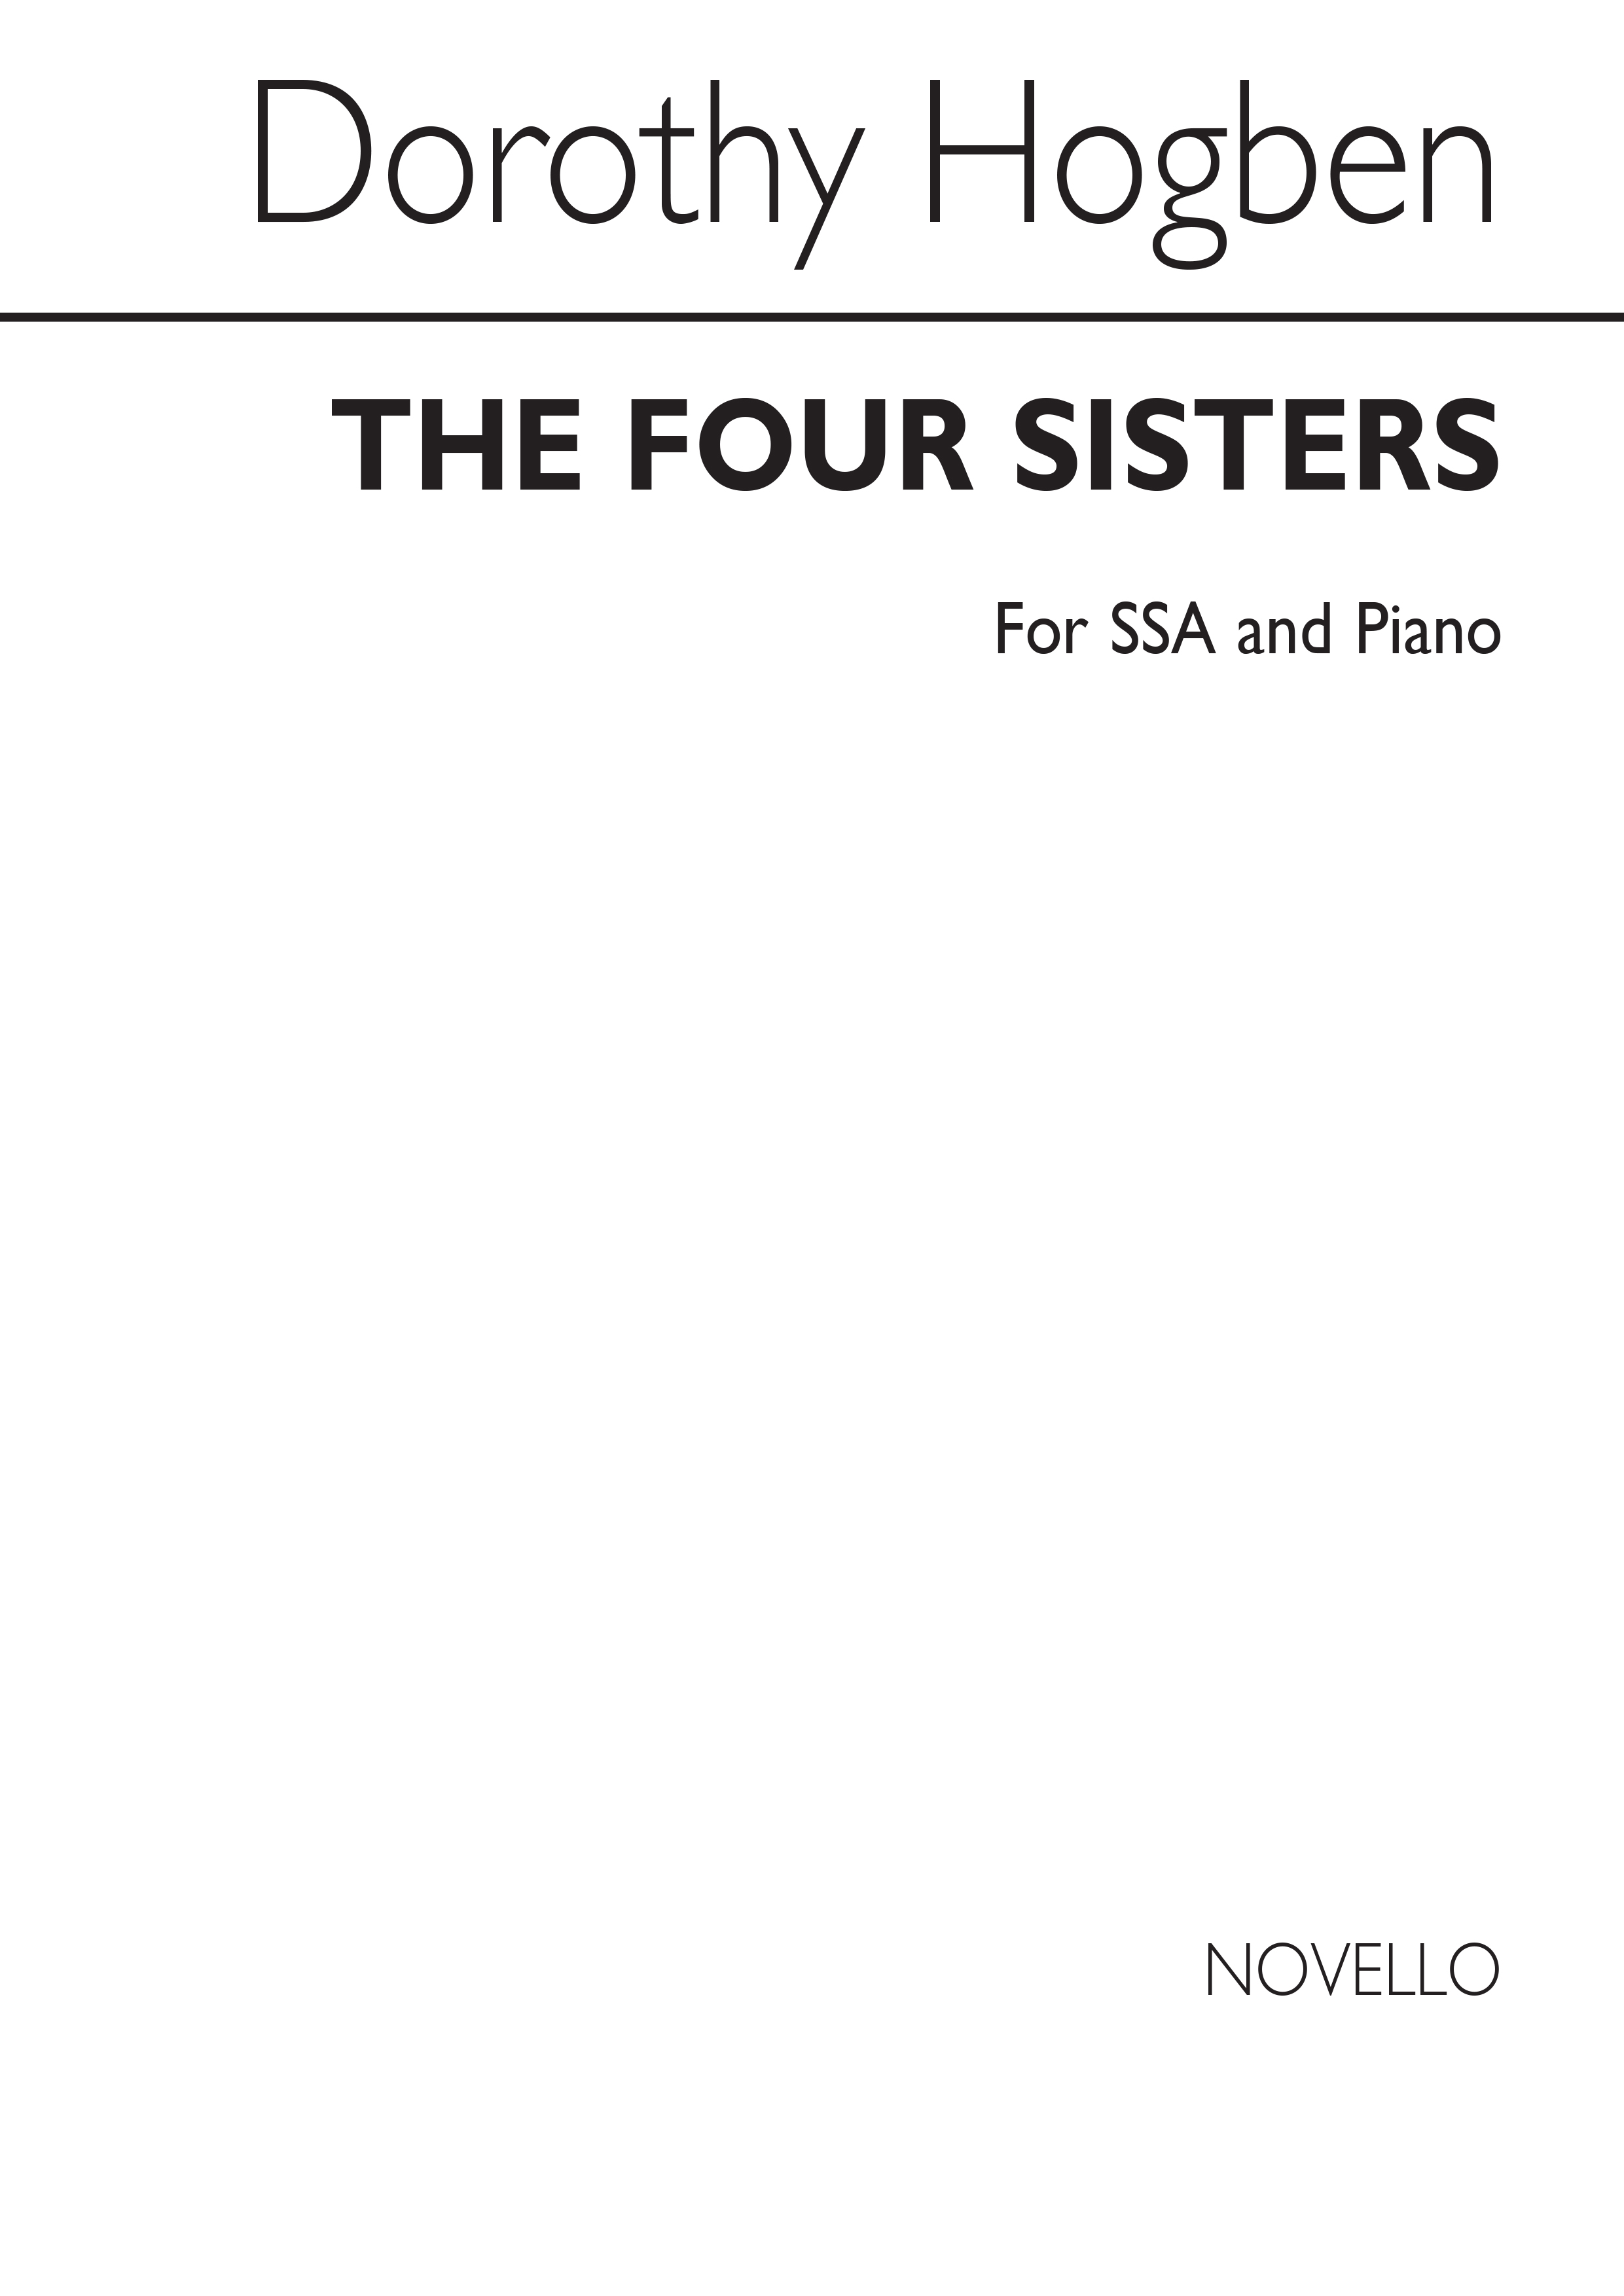 Hogben: Four Sisters for SSA